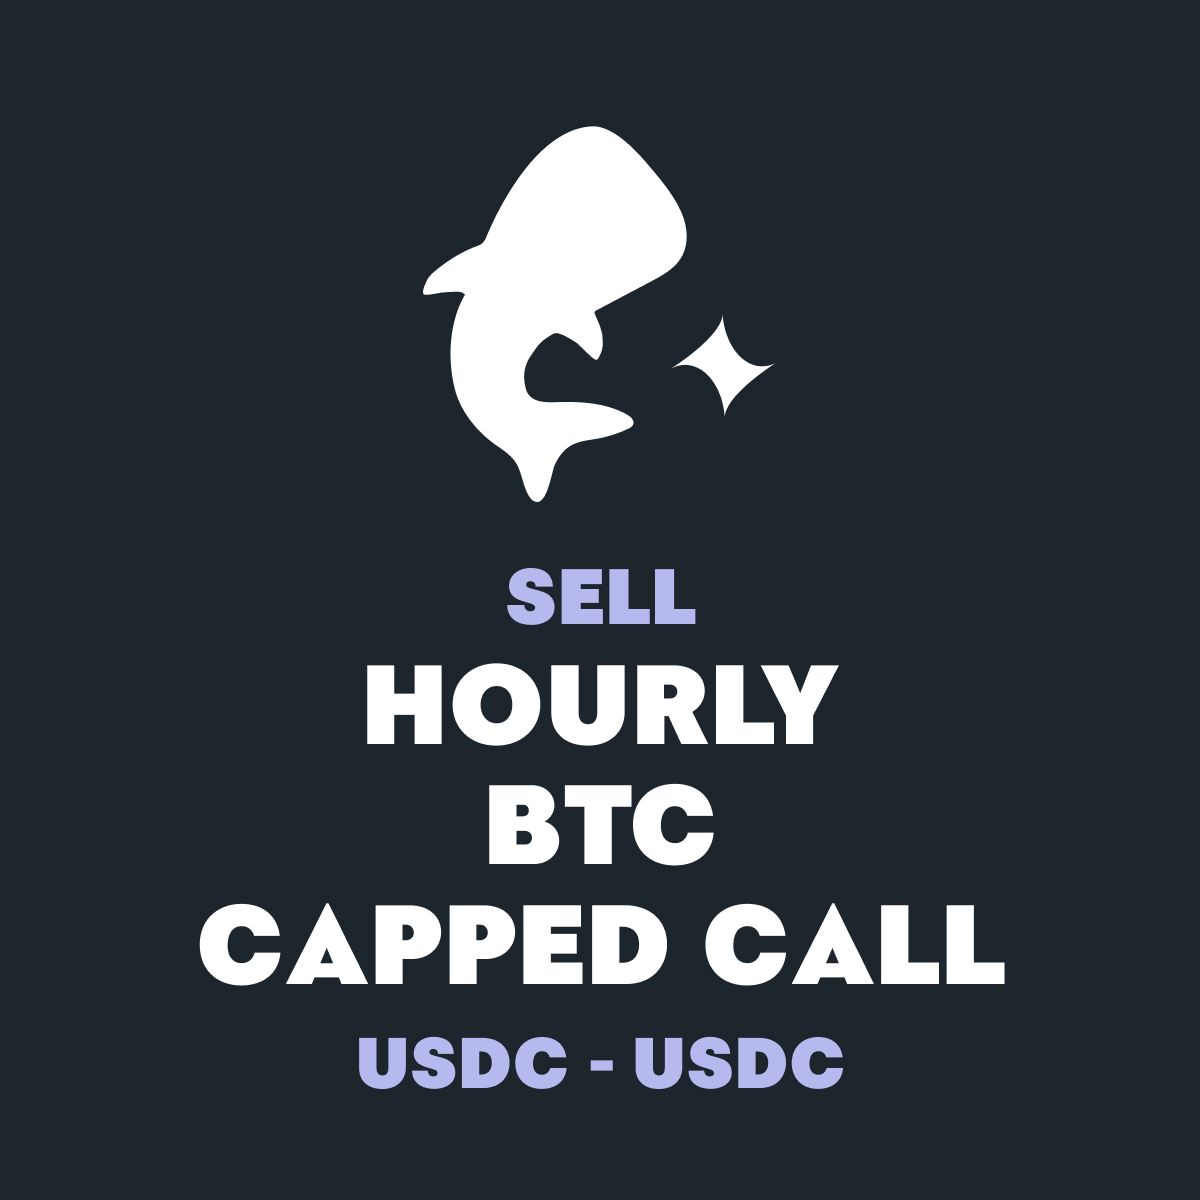 Typus Deposit Receipt | BTC-Hourly-UsdcCappedCall